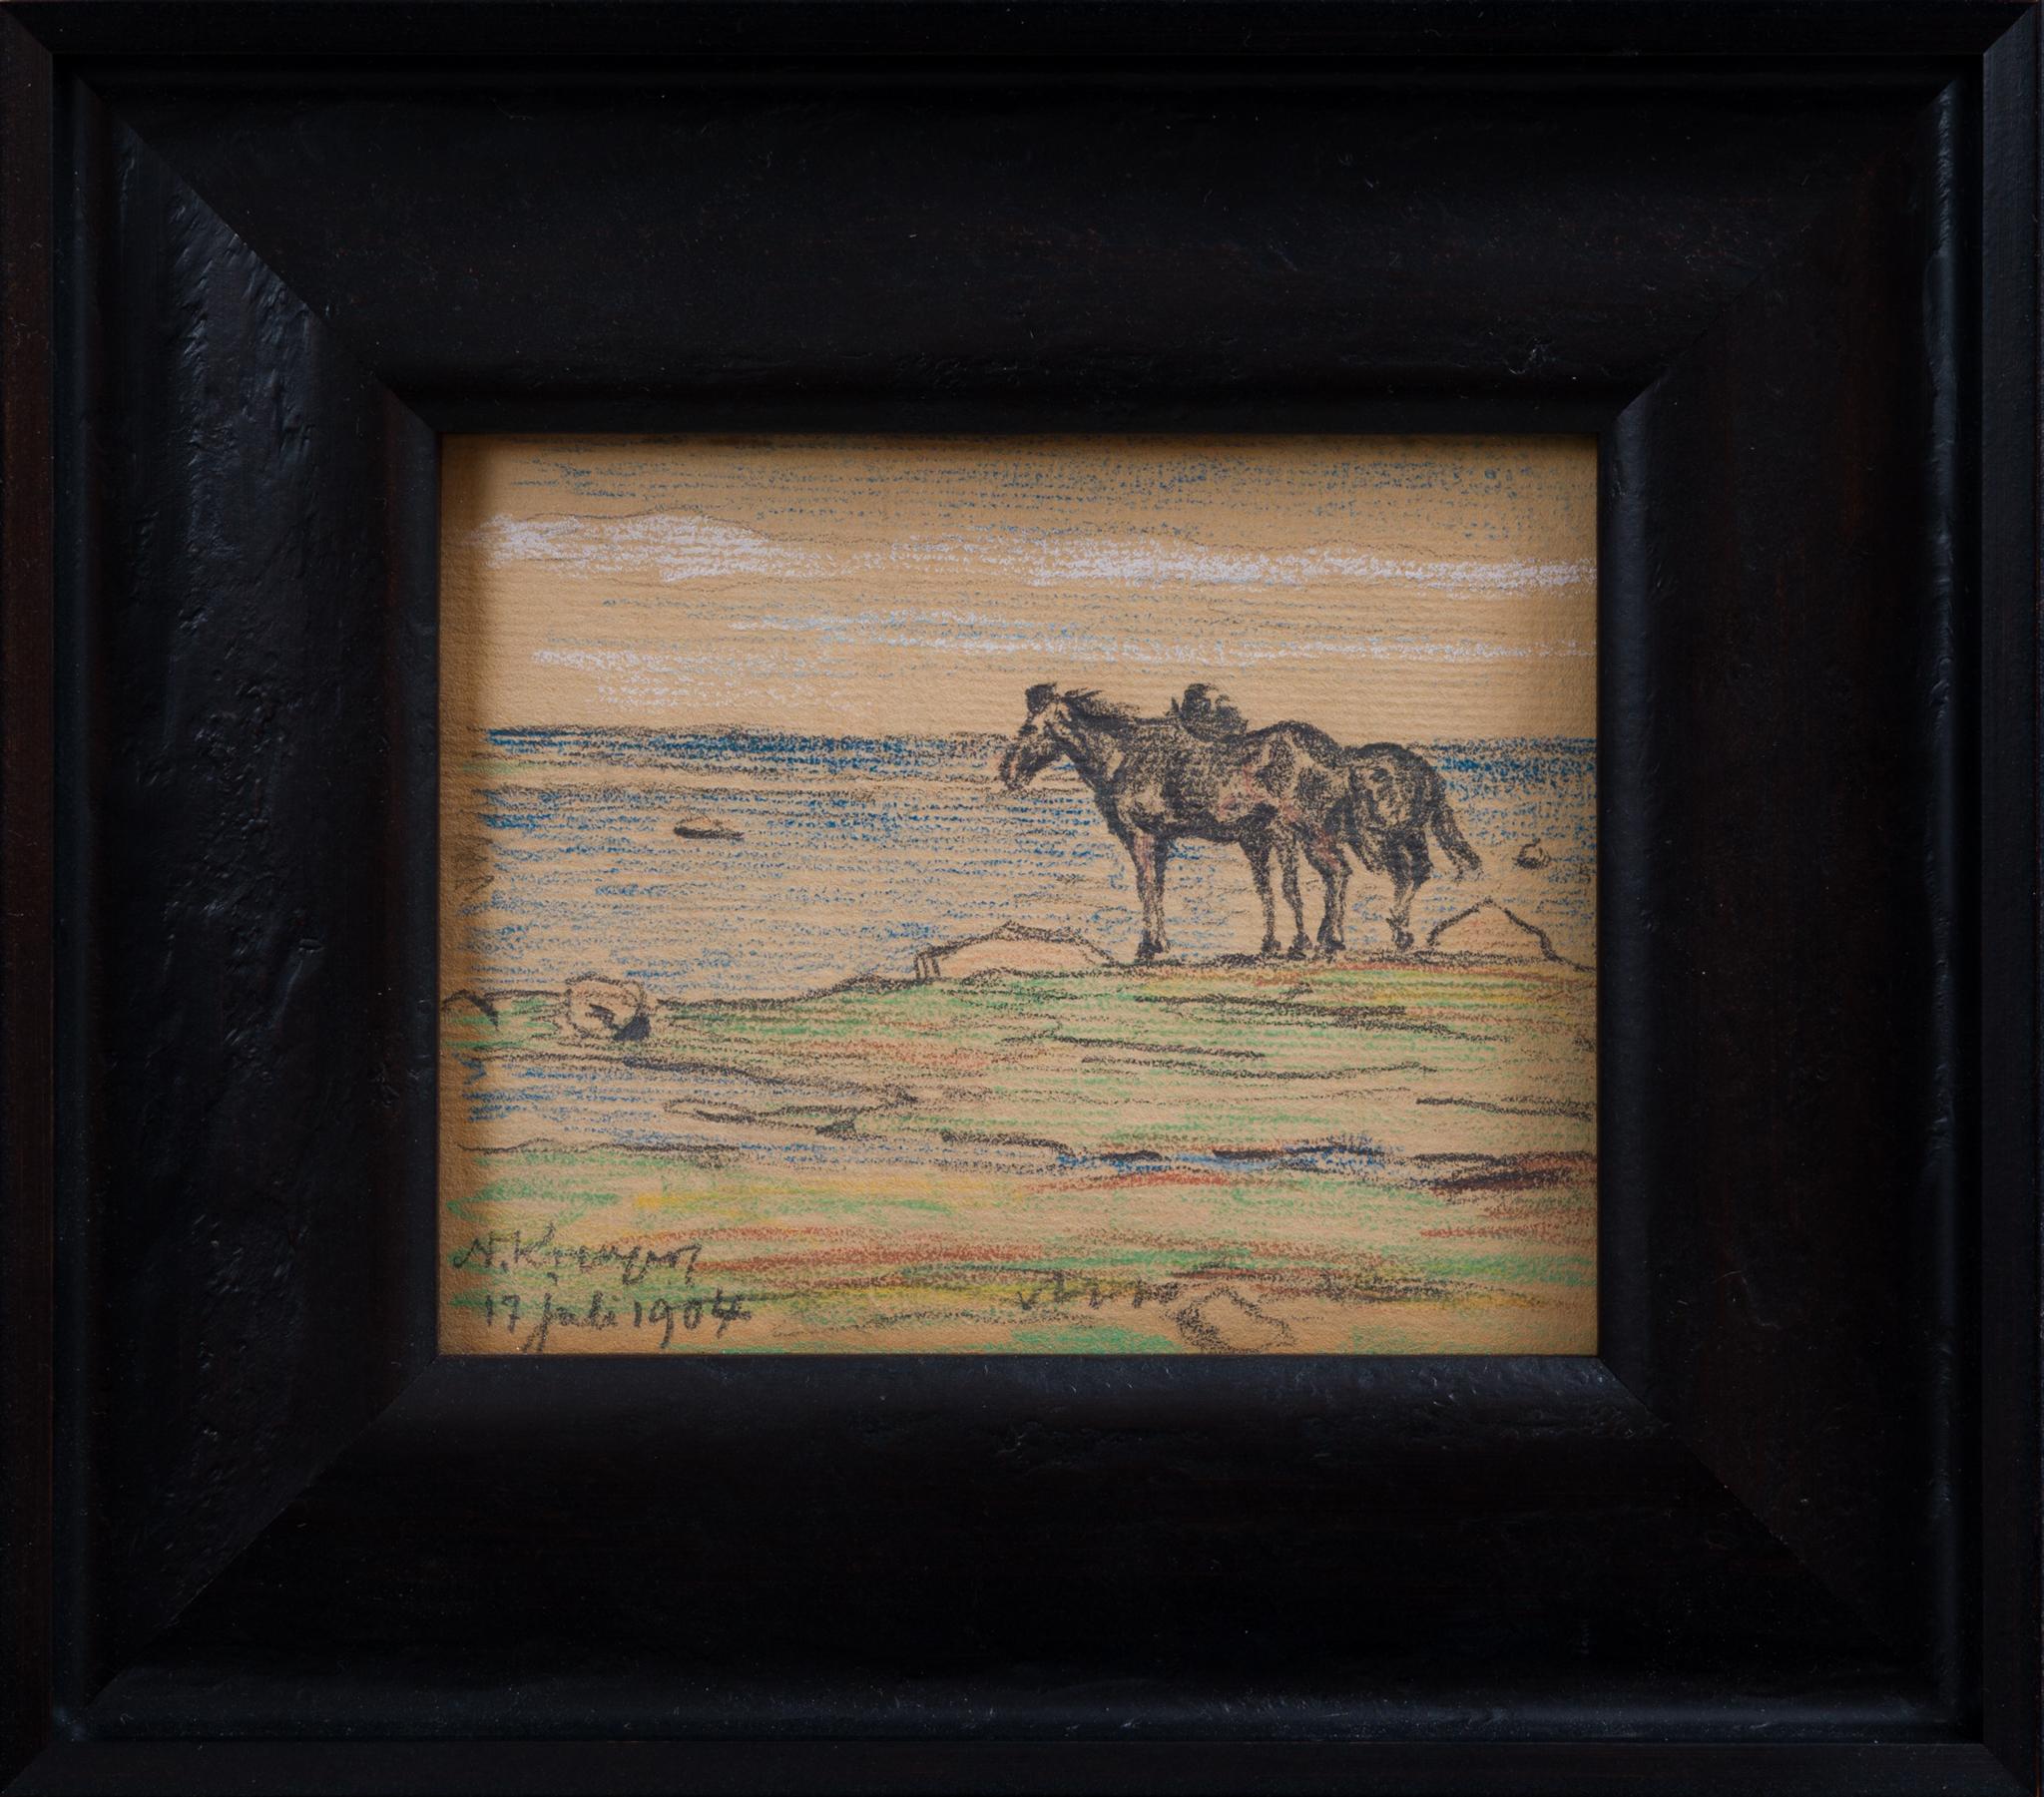 Two Horses by the Shore, Painted With Pastel Crayon, 1904